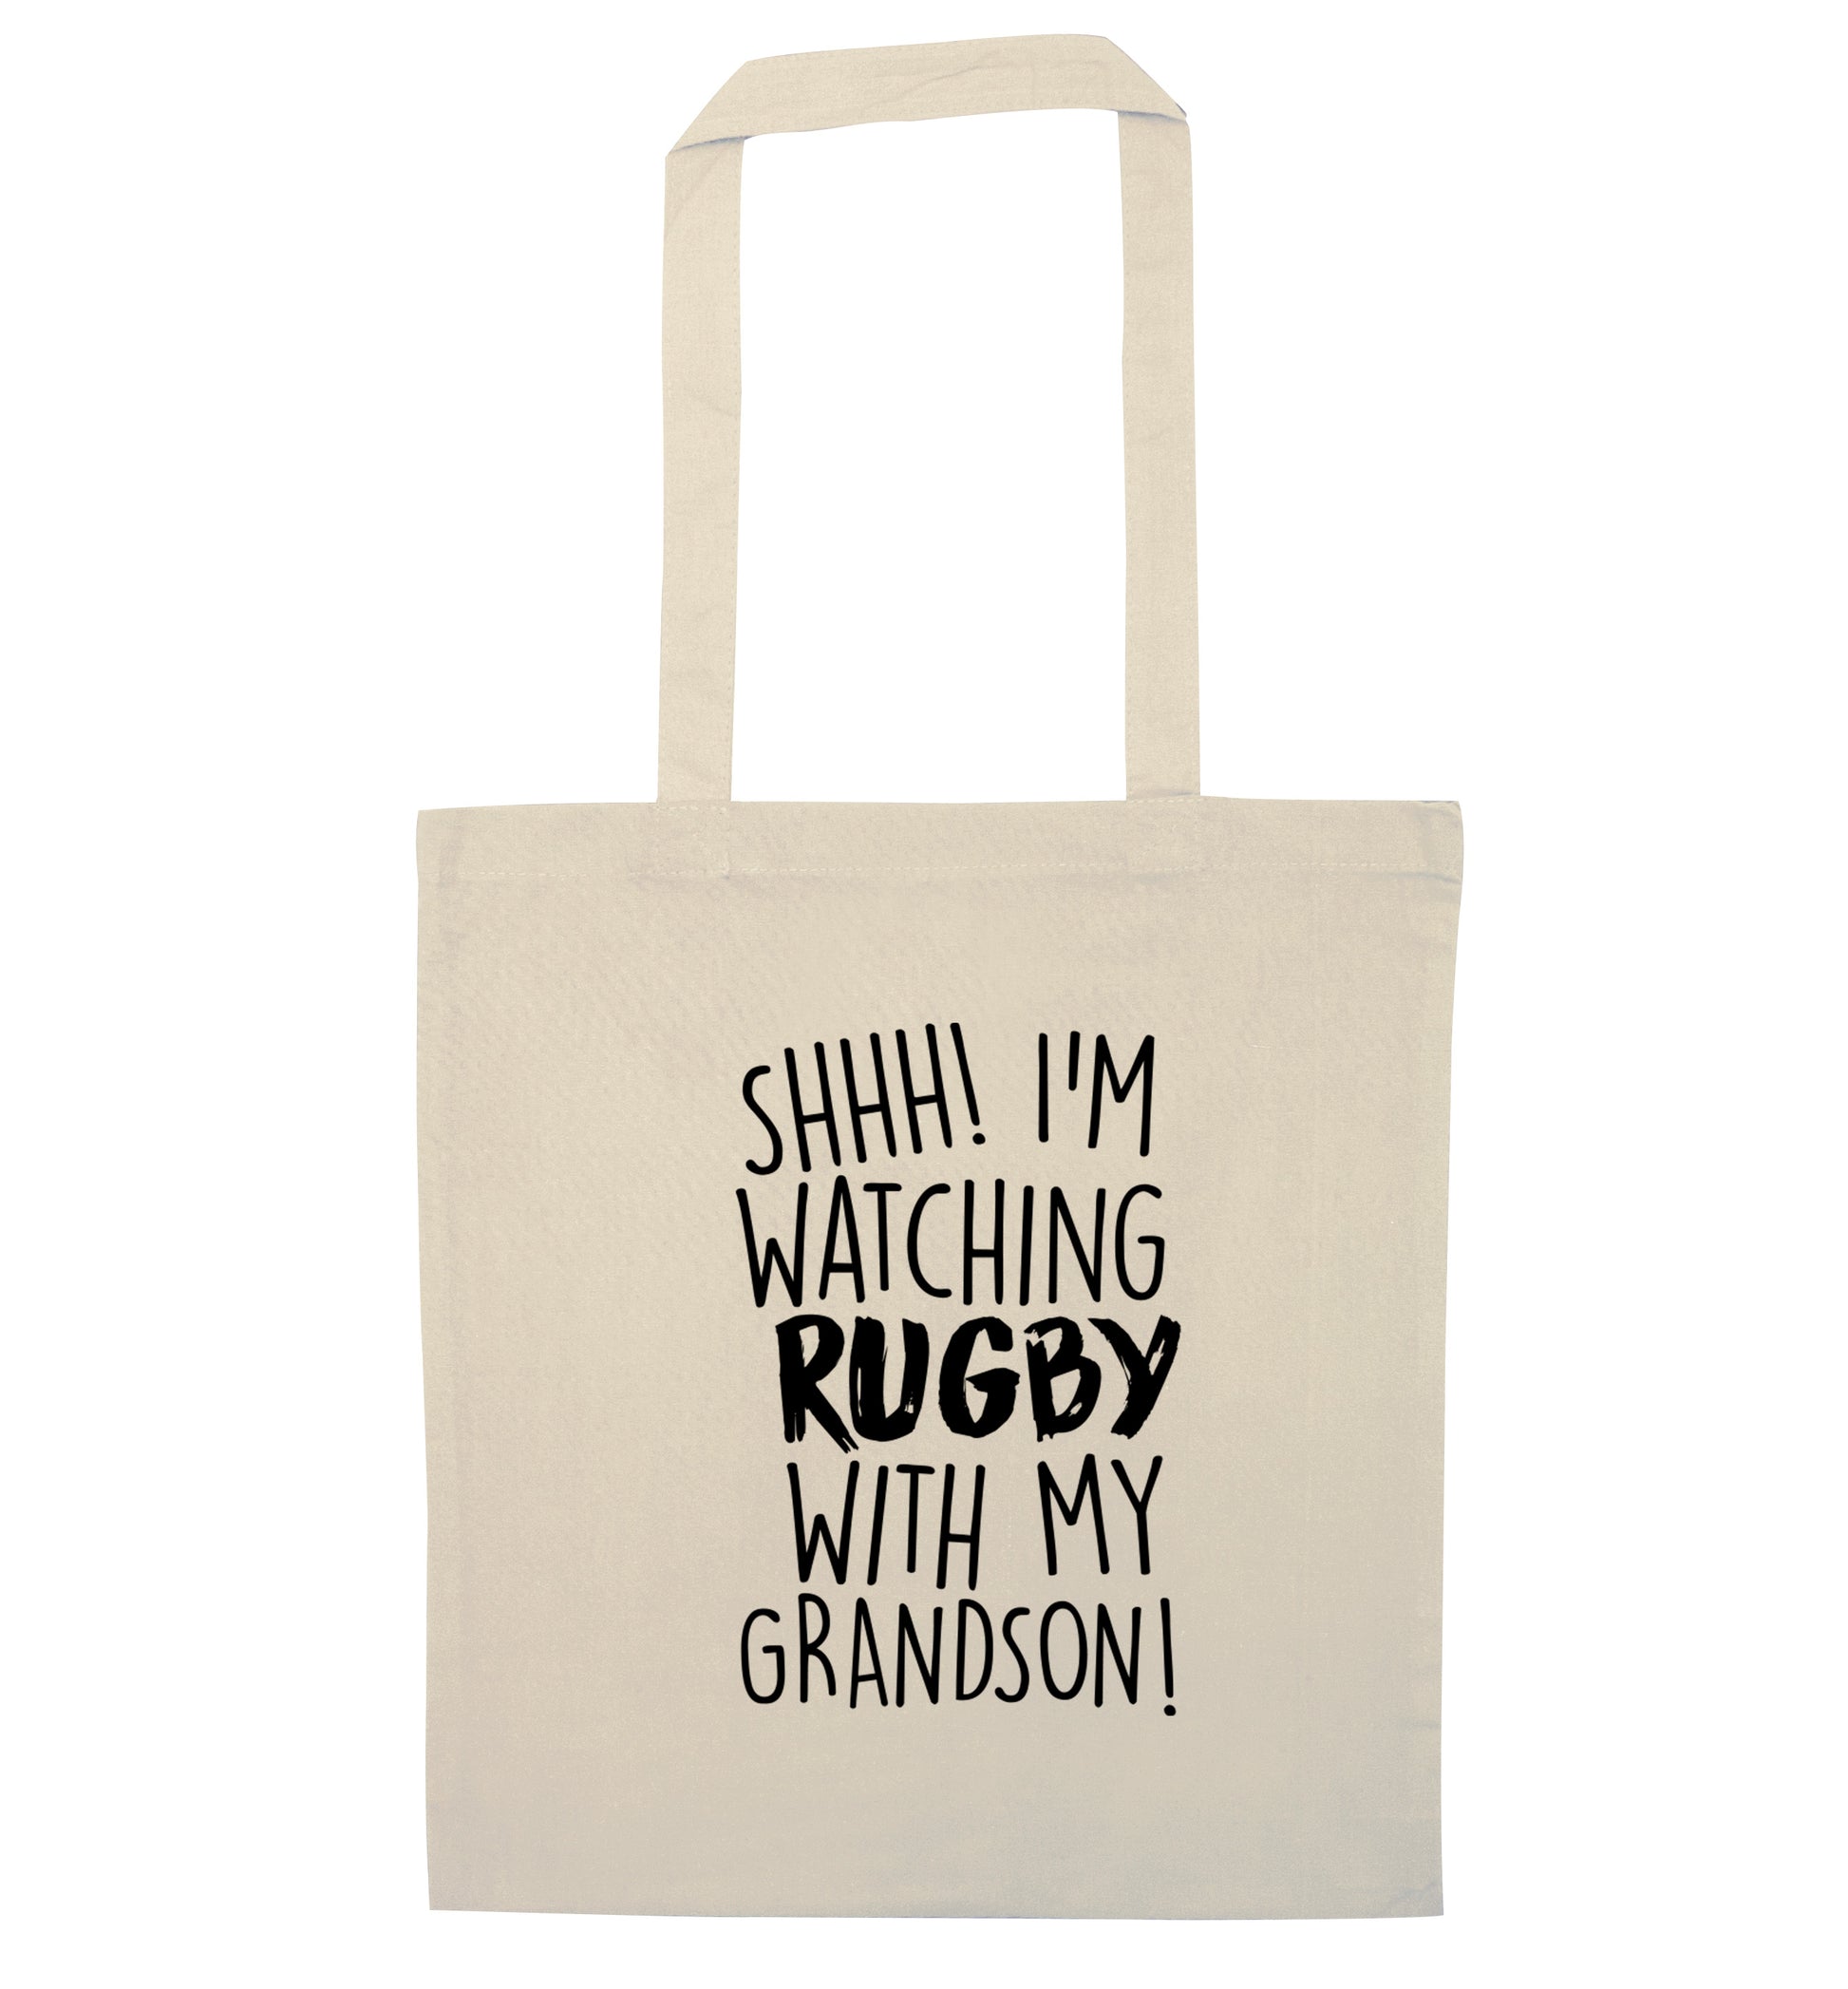 Shh I'm watching rugby with my grandson natural tote bag